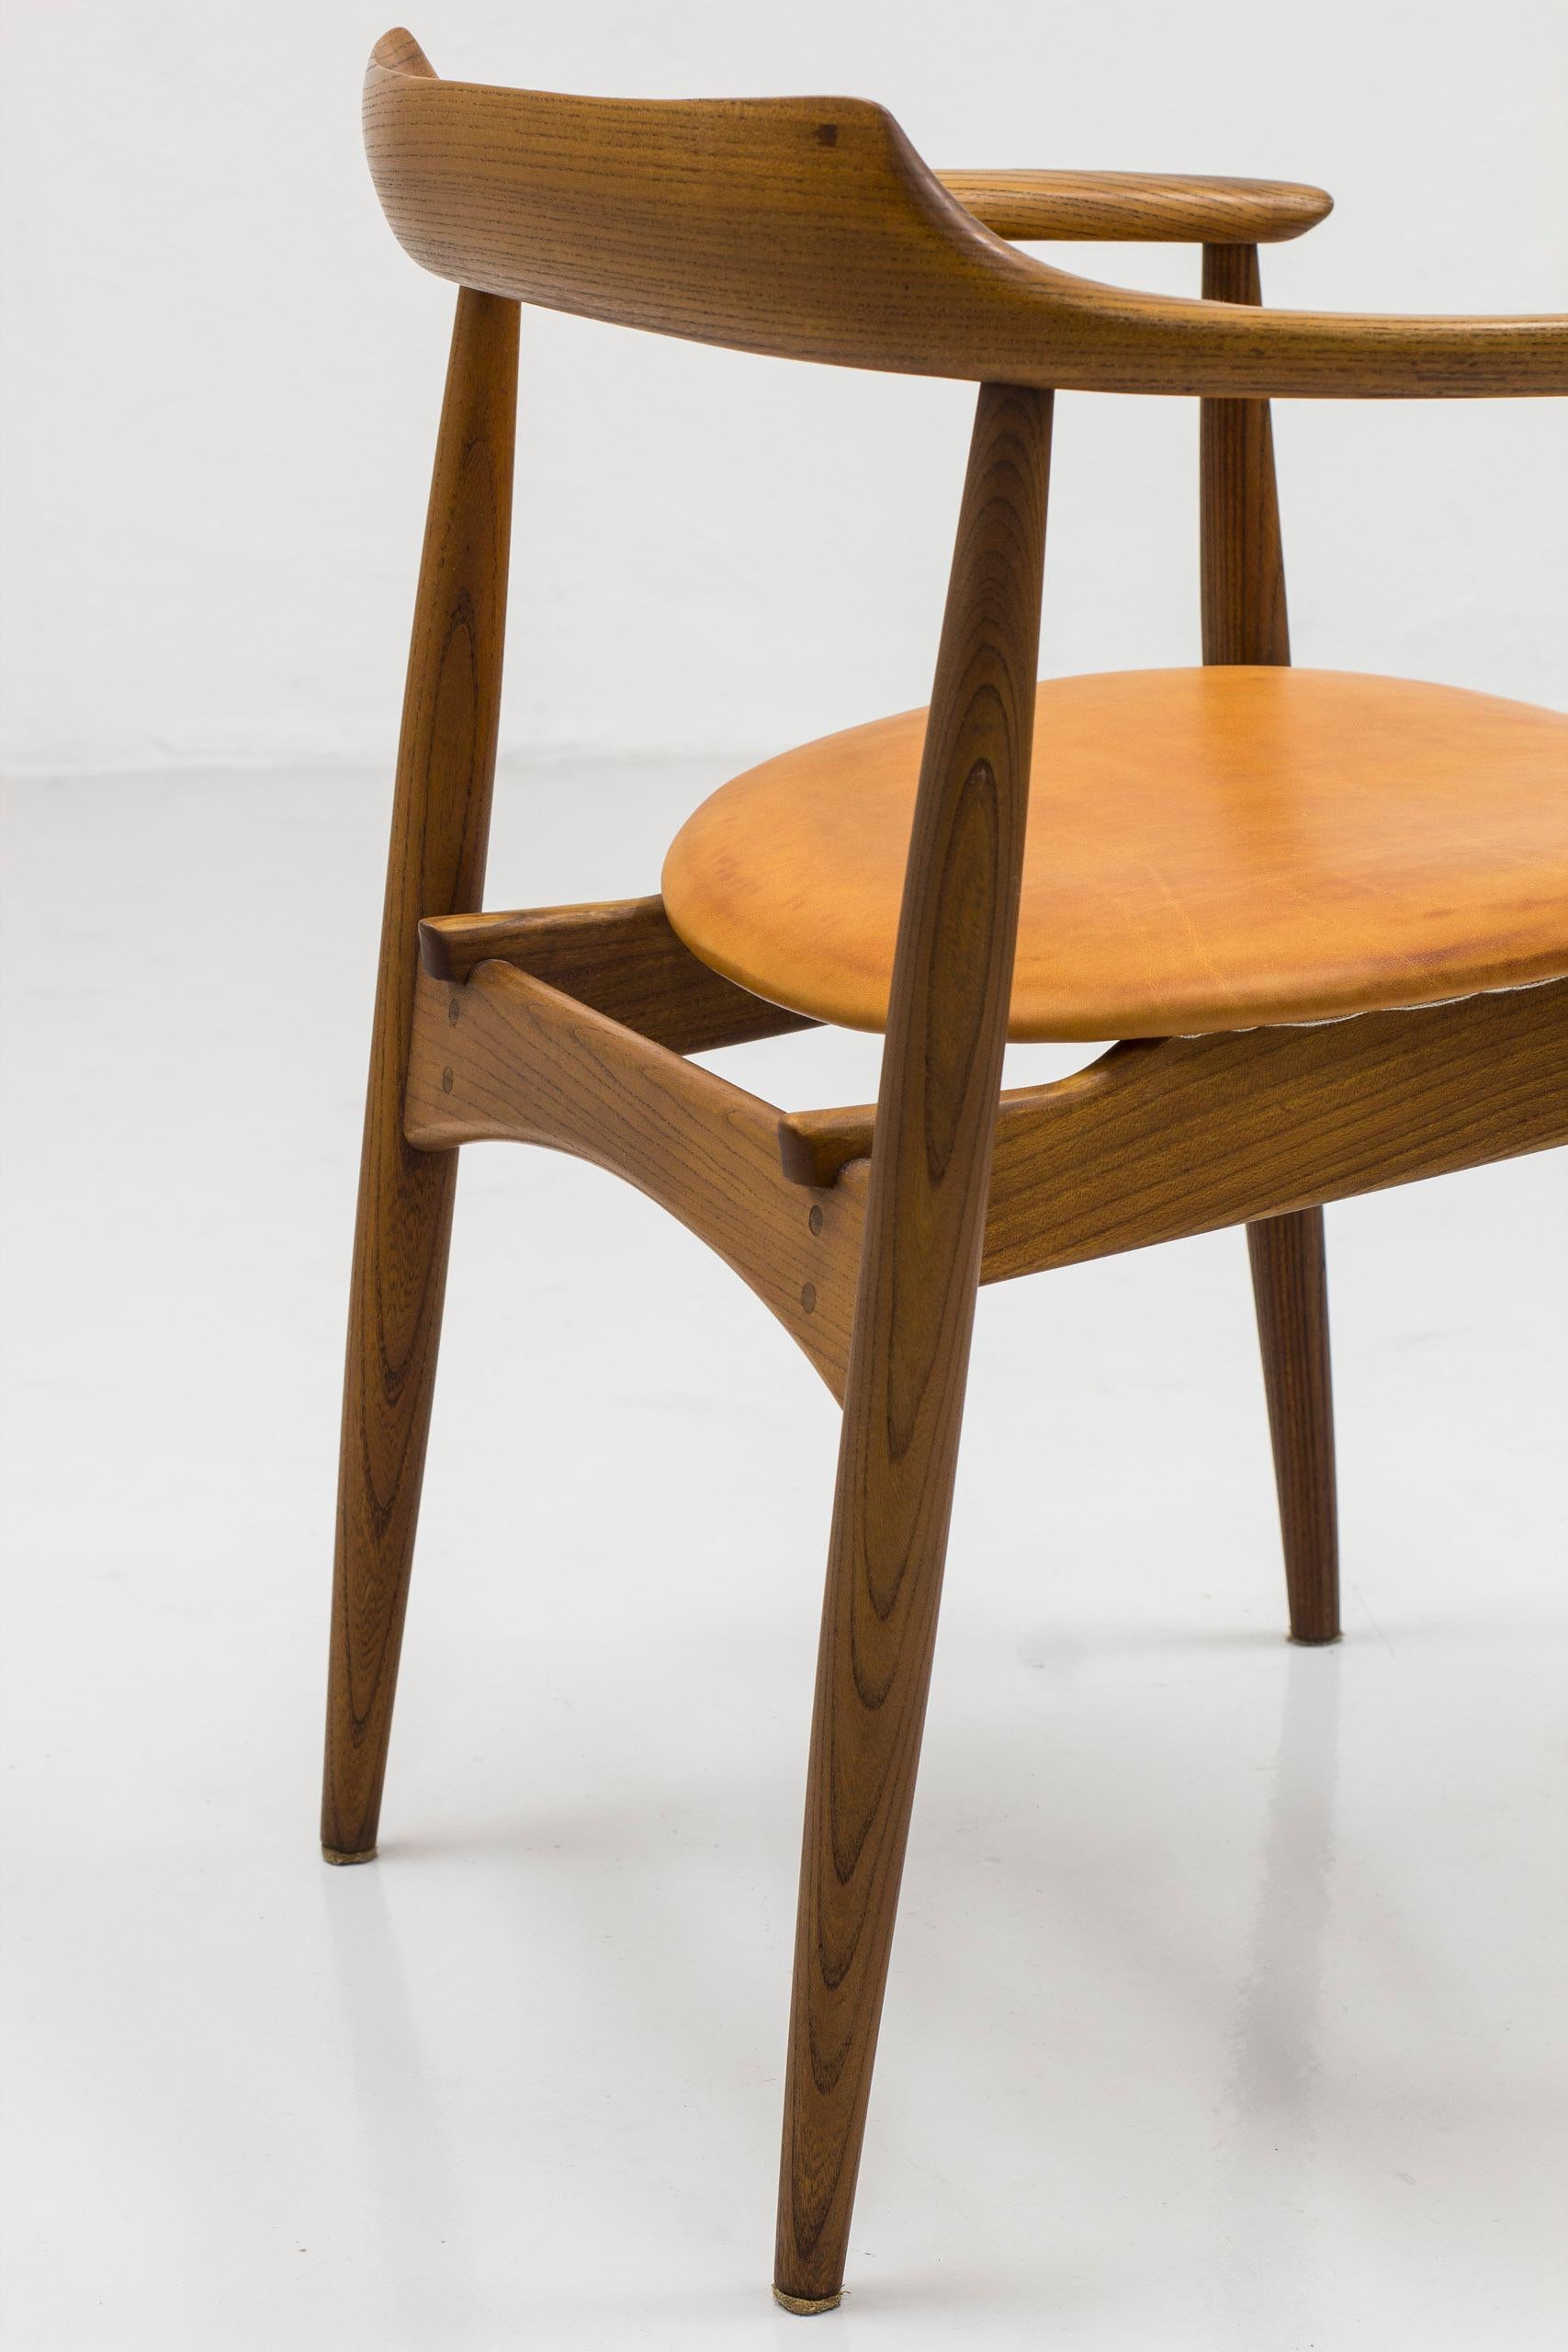 Arm chair in elm and leather with exquisite patina by Arne Wahl Iversen, 1960s For Sale 6